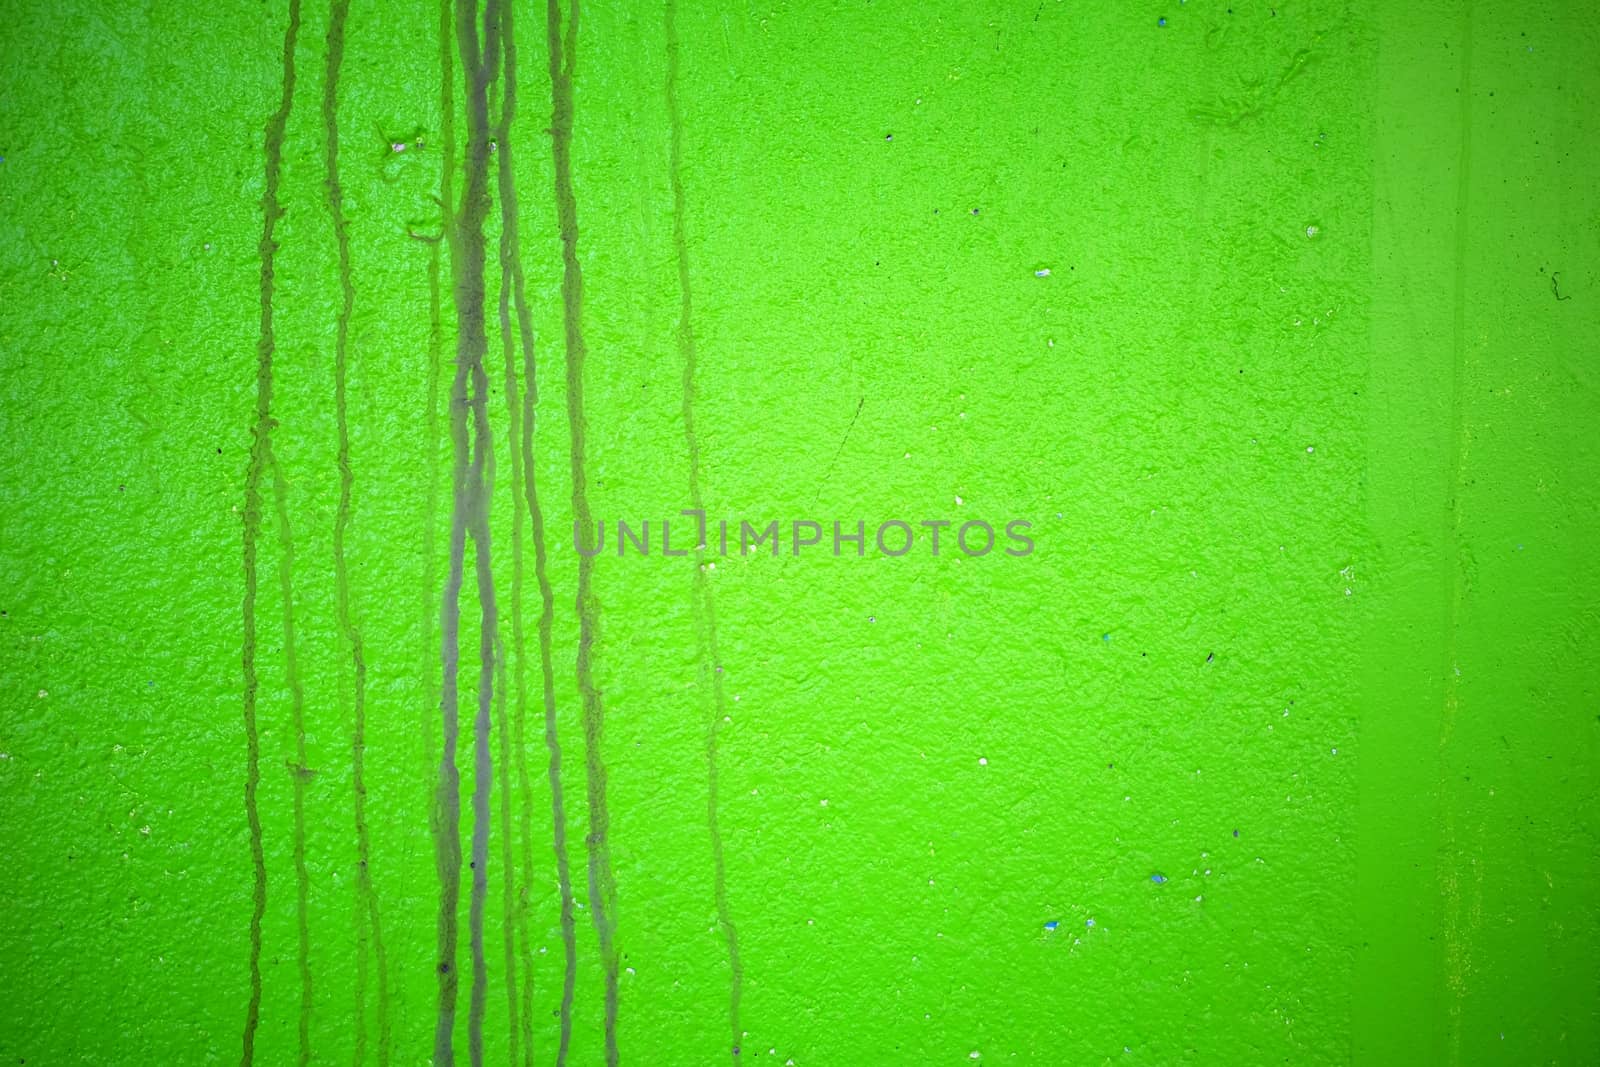 Water Stain on Green Painted Concrete Wall Texture Background. by mesamong